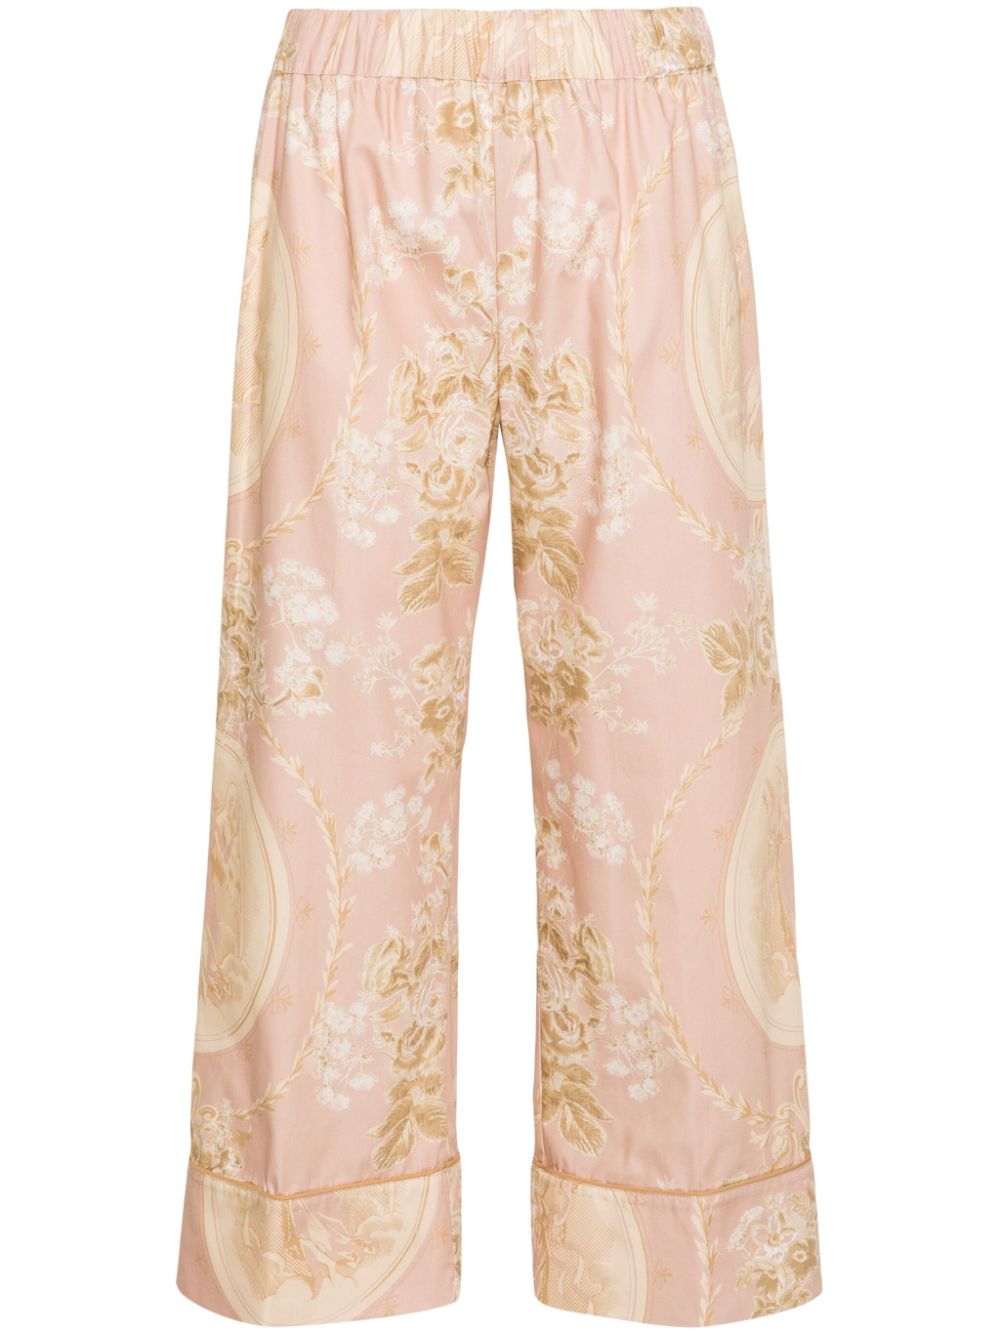 Semicouture floral-print cotton trousers - Pink von Semicouture